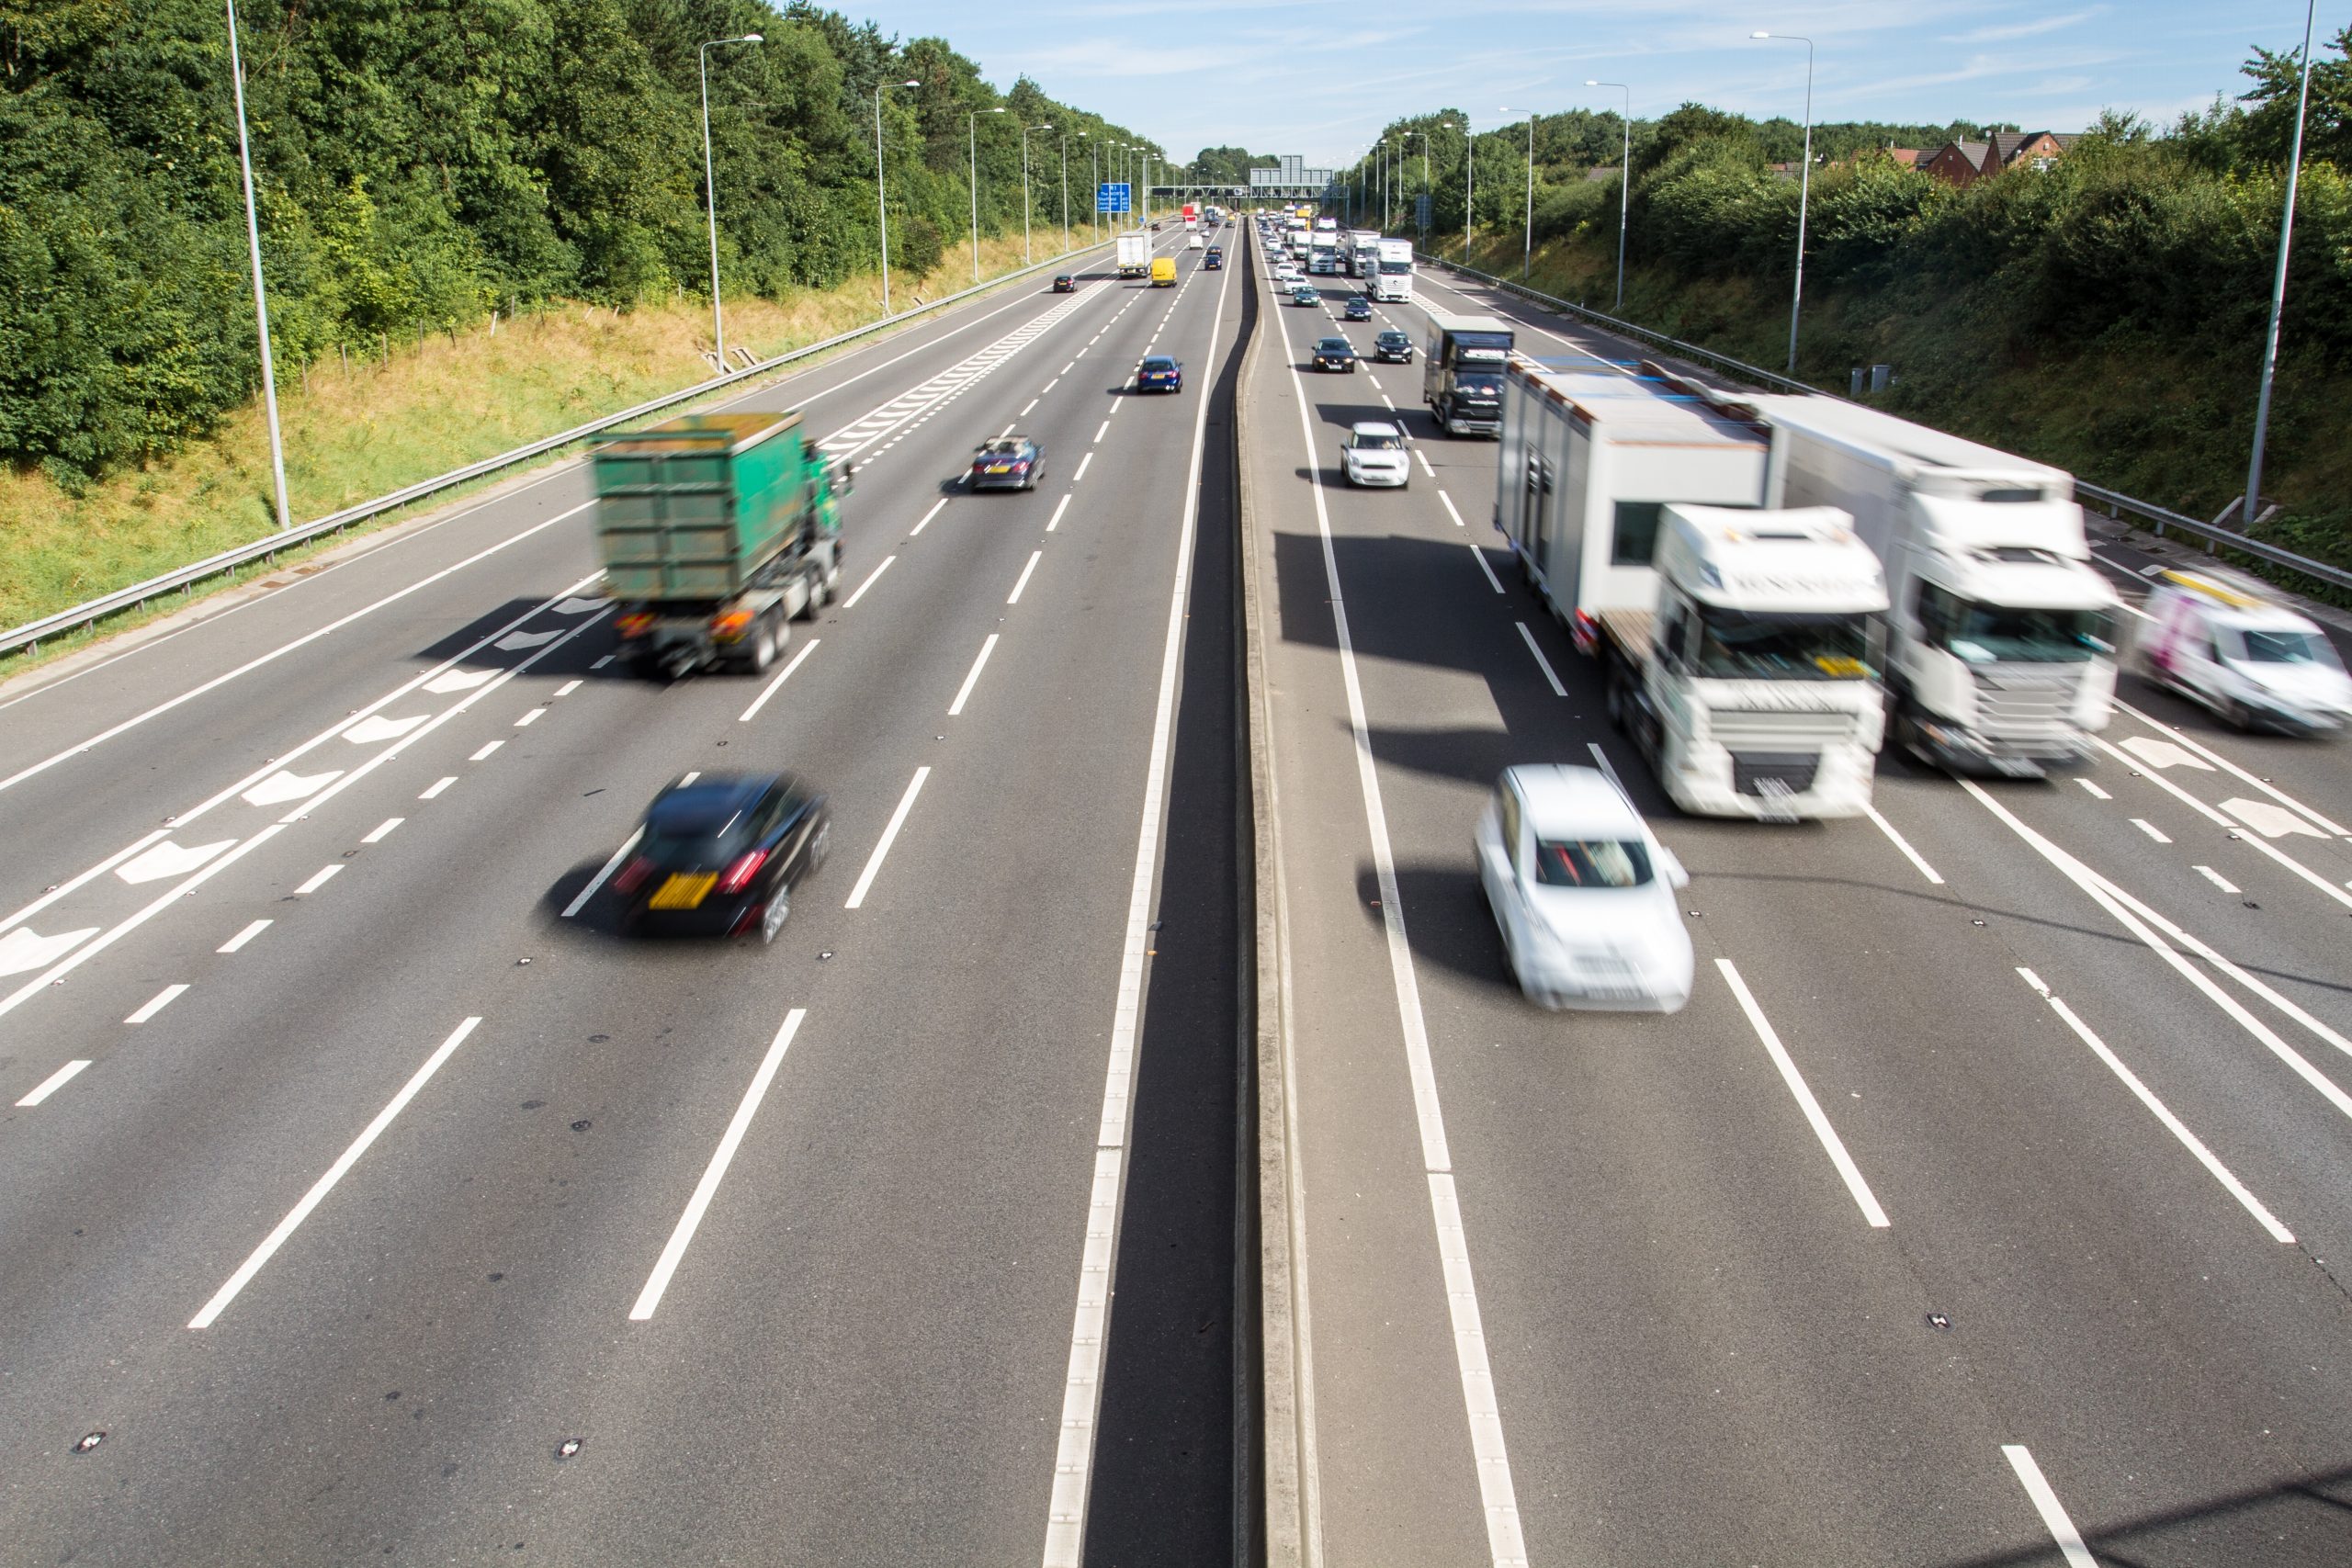 MPs call for road pricing to replace motoring taxes